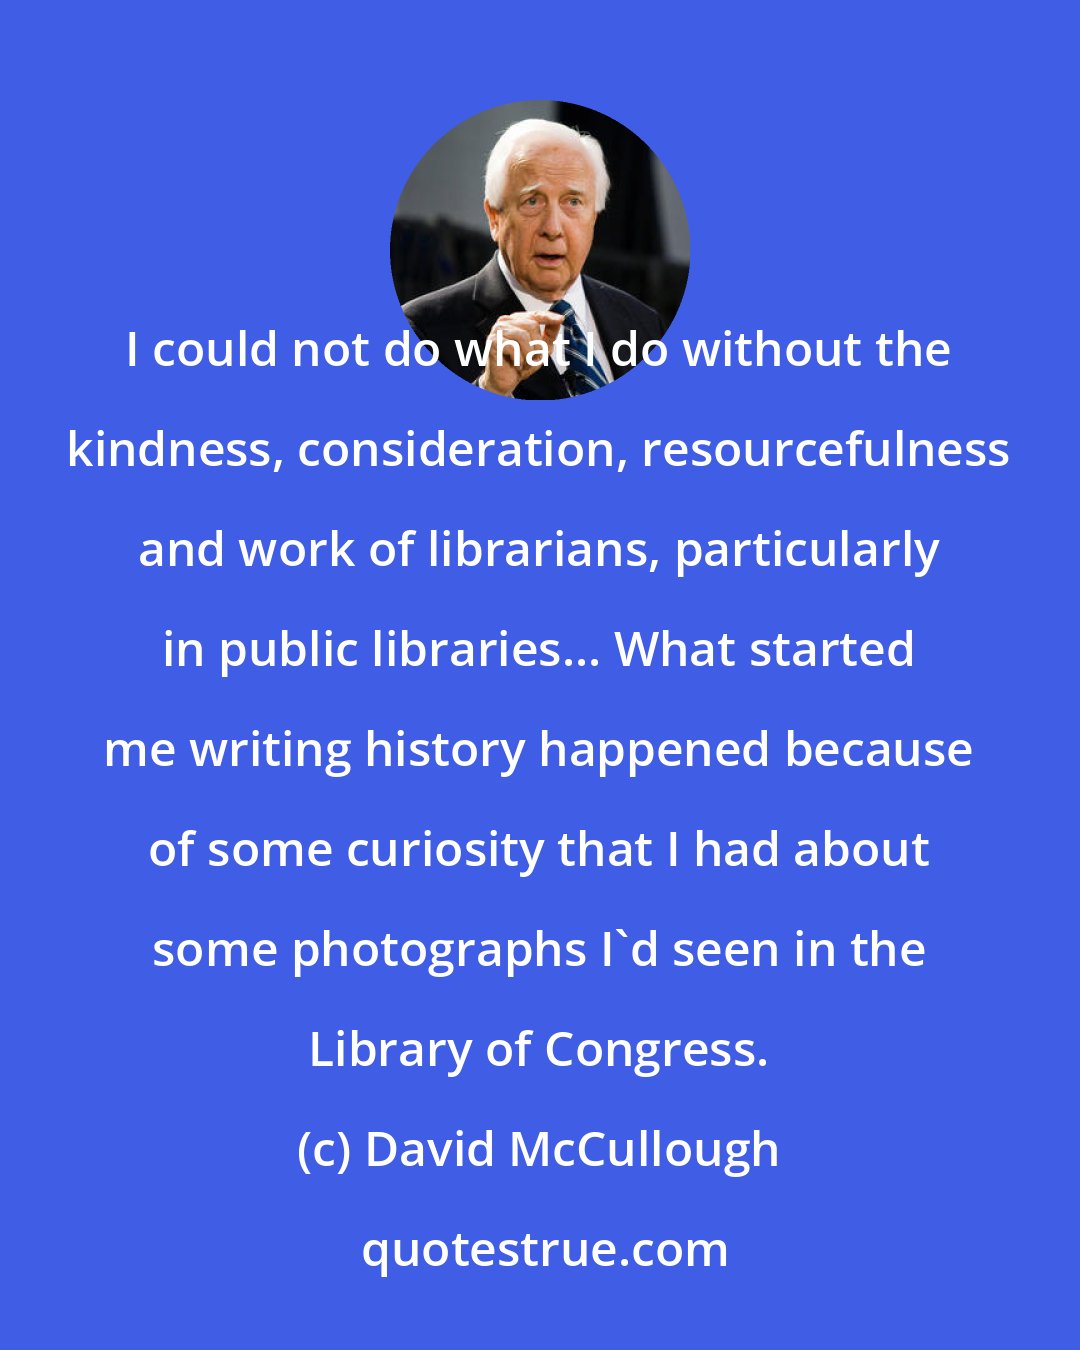 David McCullough: I could not do what I do without the kindness, consideration, resourcefulness and work of librarians, particularly in public libraries... What started me writing history happened because of some curiosity that I had about some photographs I'd seen in the Library of Congress.